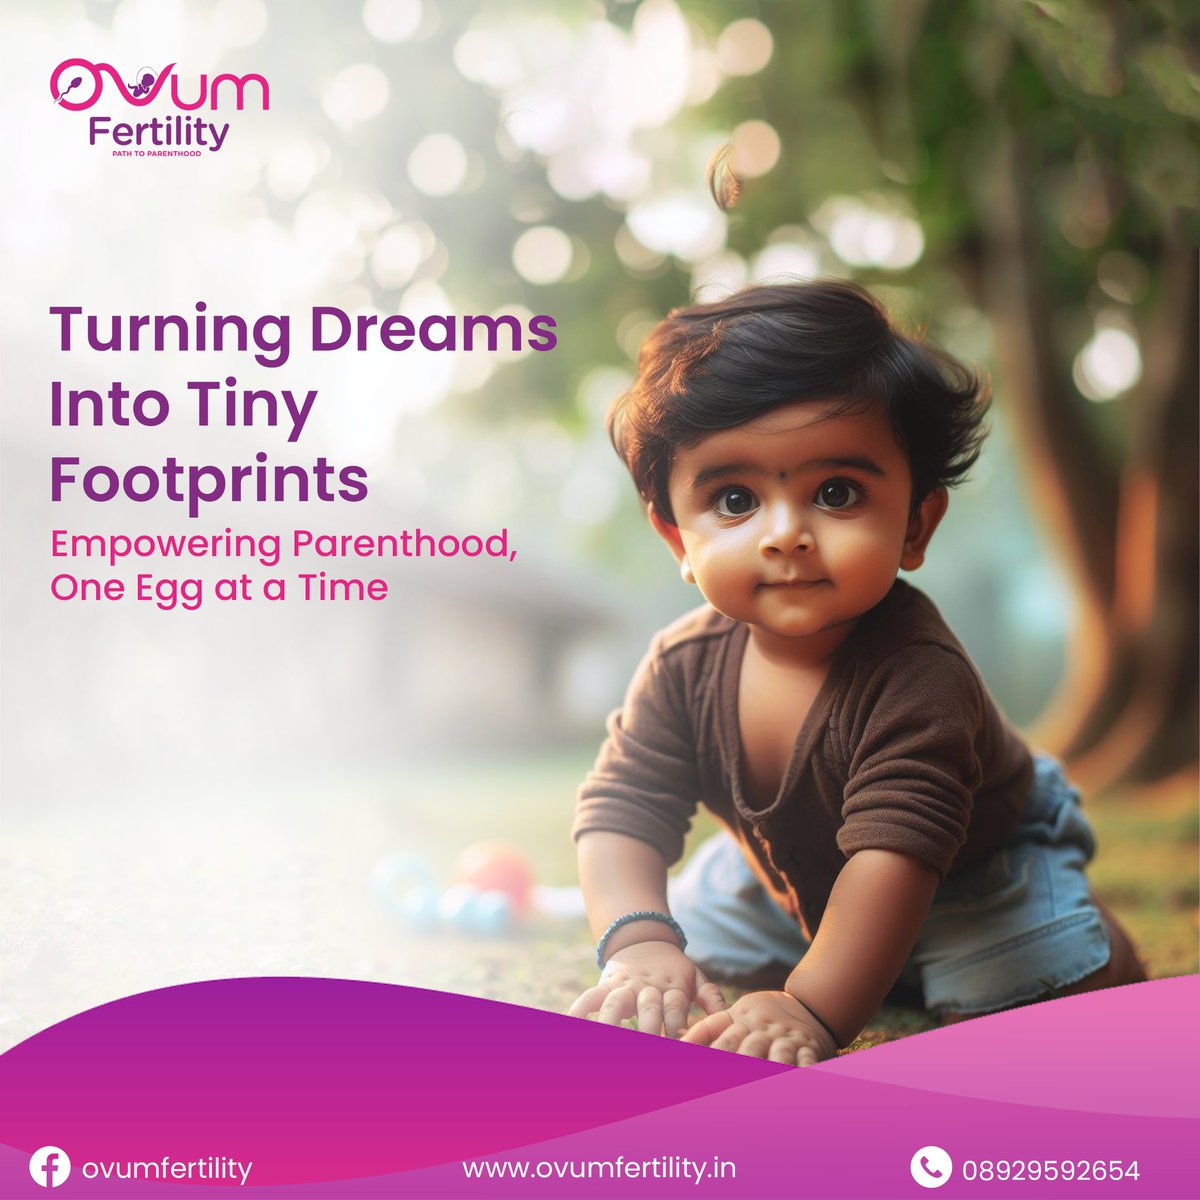 🌟 Turn your fertility dreams into reality with Ovum Fertility! 🌟
At Ovum Fertility, we believe that every individual deserves the chance to build the family of their dreams. 

#OVUMFertility #CreatingFamilies #ParenthoodJourney